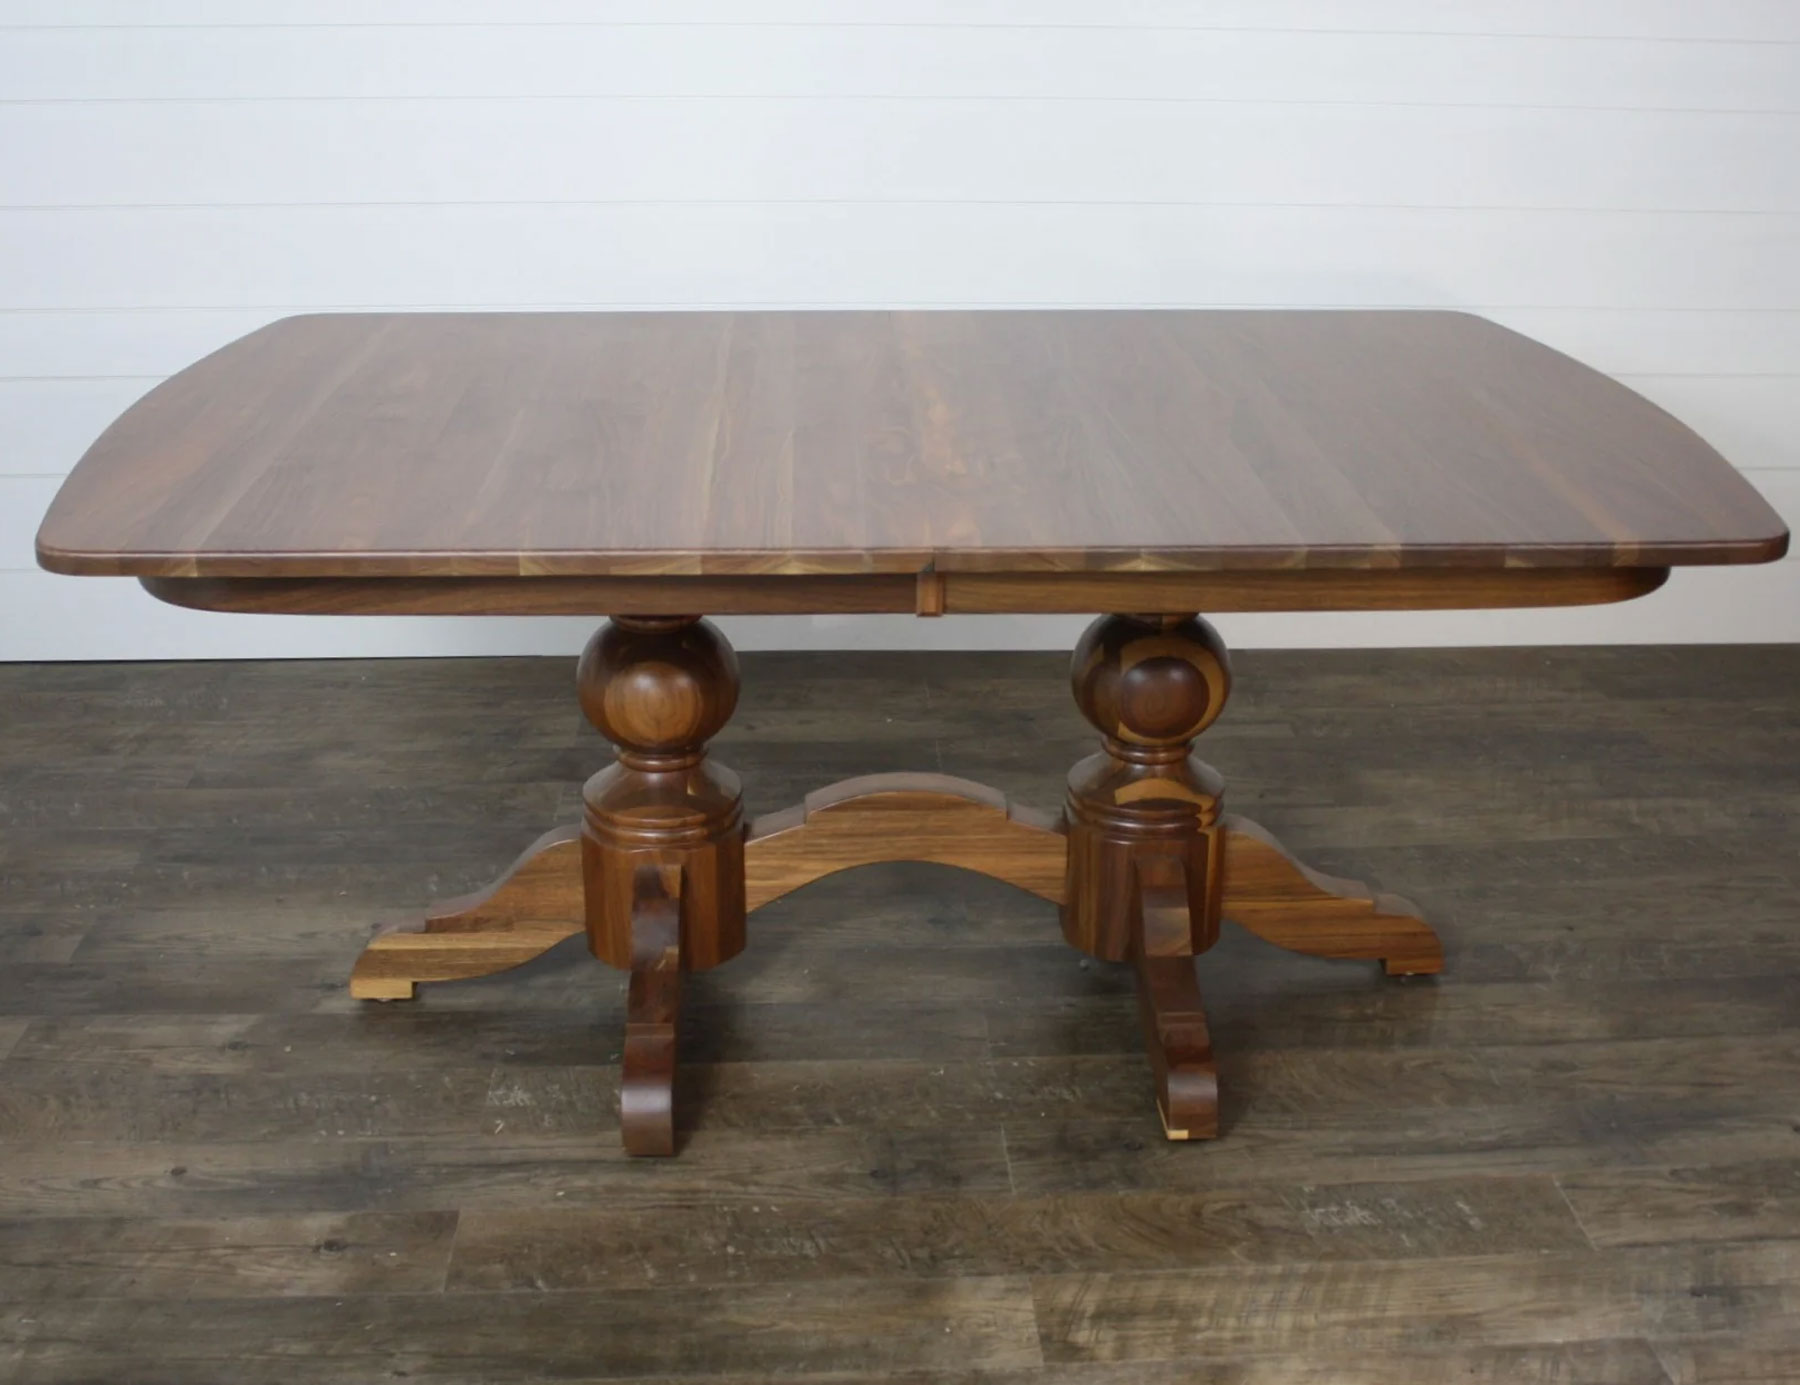 Kowan 44 x 72 Double Pedestal Table with (2) Leaf Extensions in Walnut